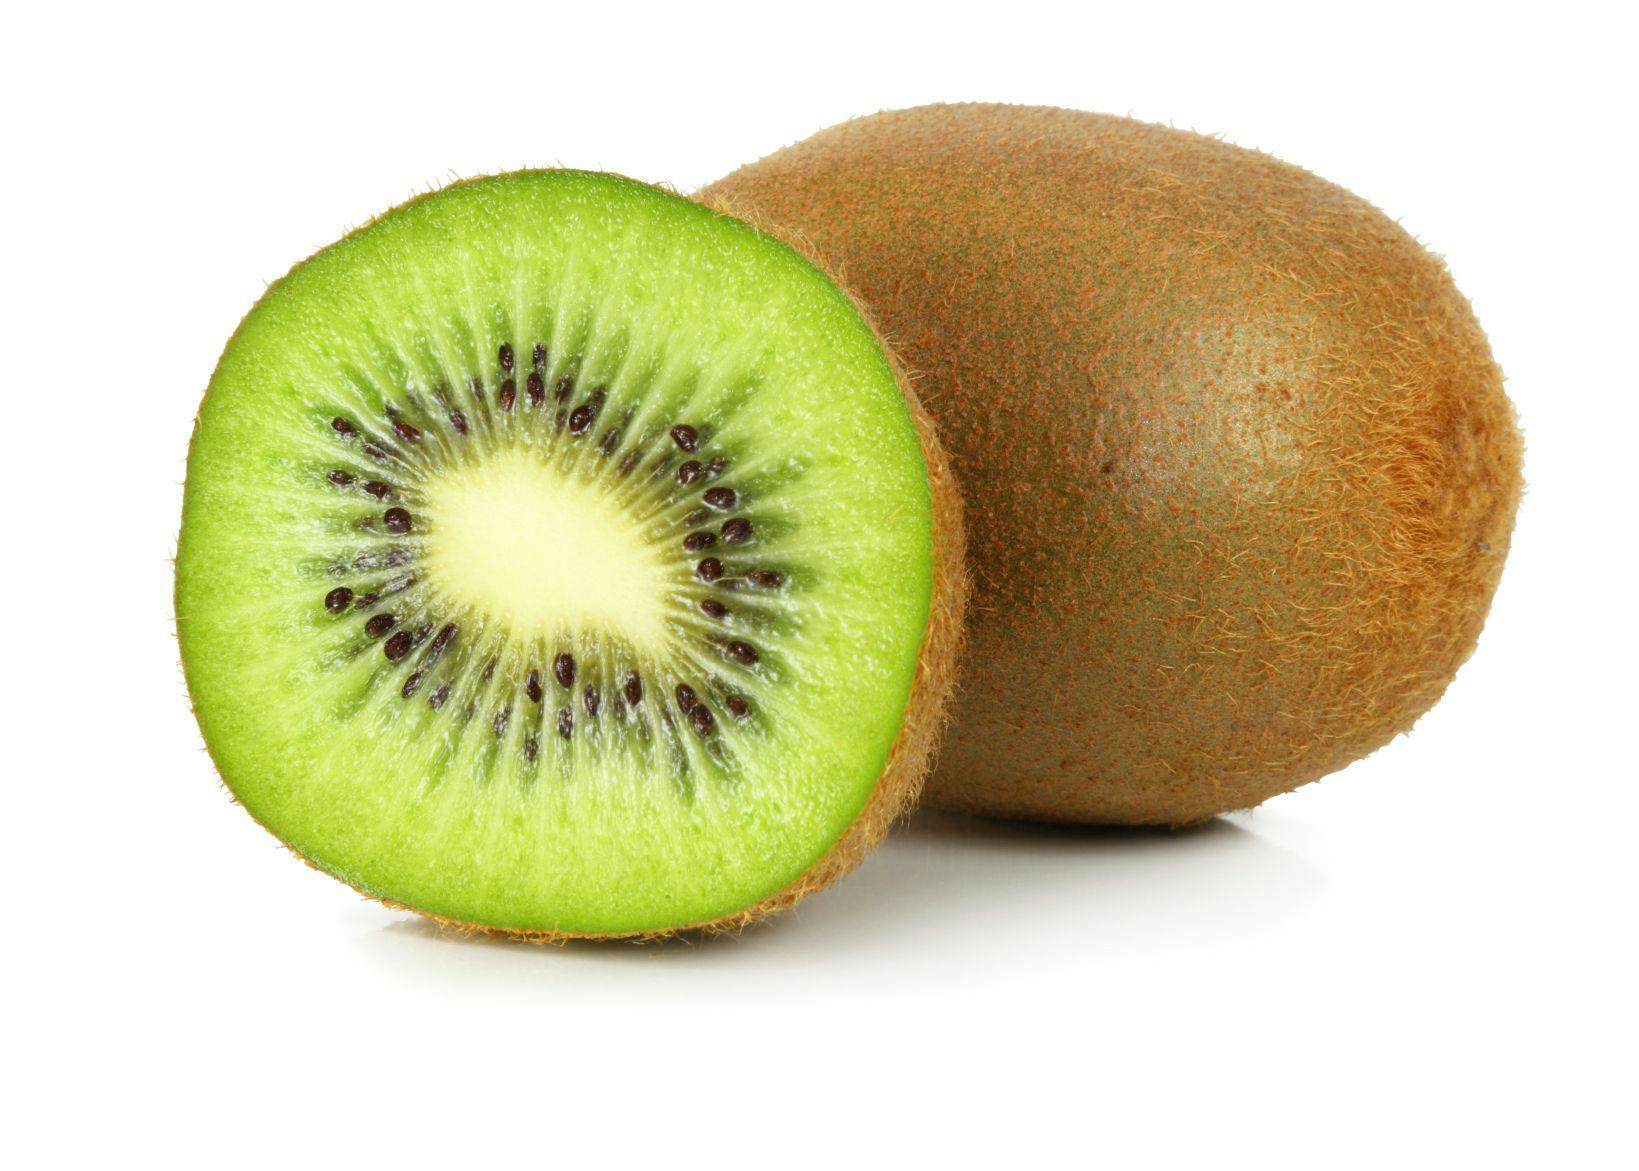 Kiwifruit Ingredients May Support Digestive Health